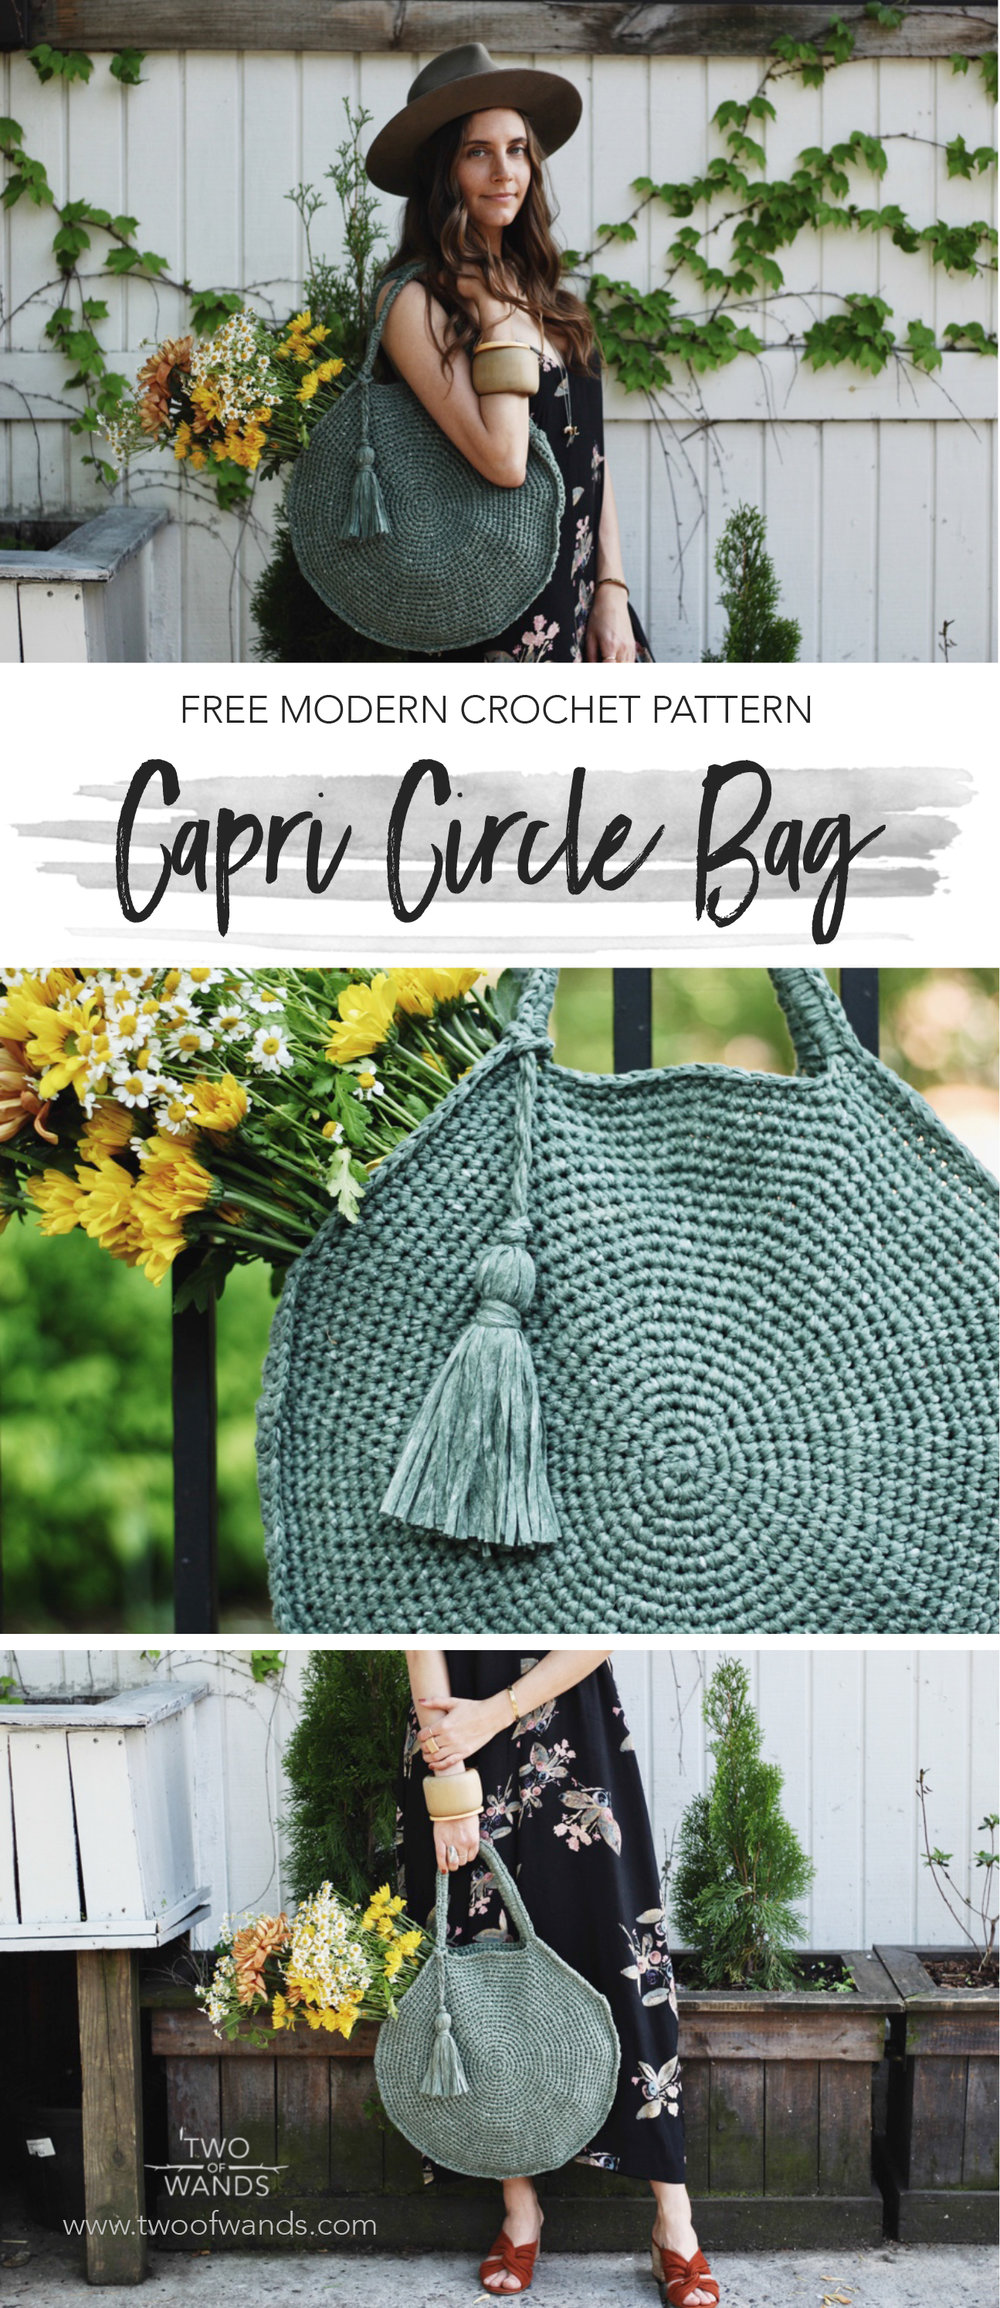 Capri Circle Bag pattern by Two of Wands